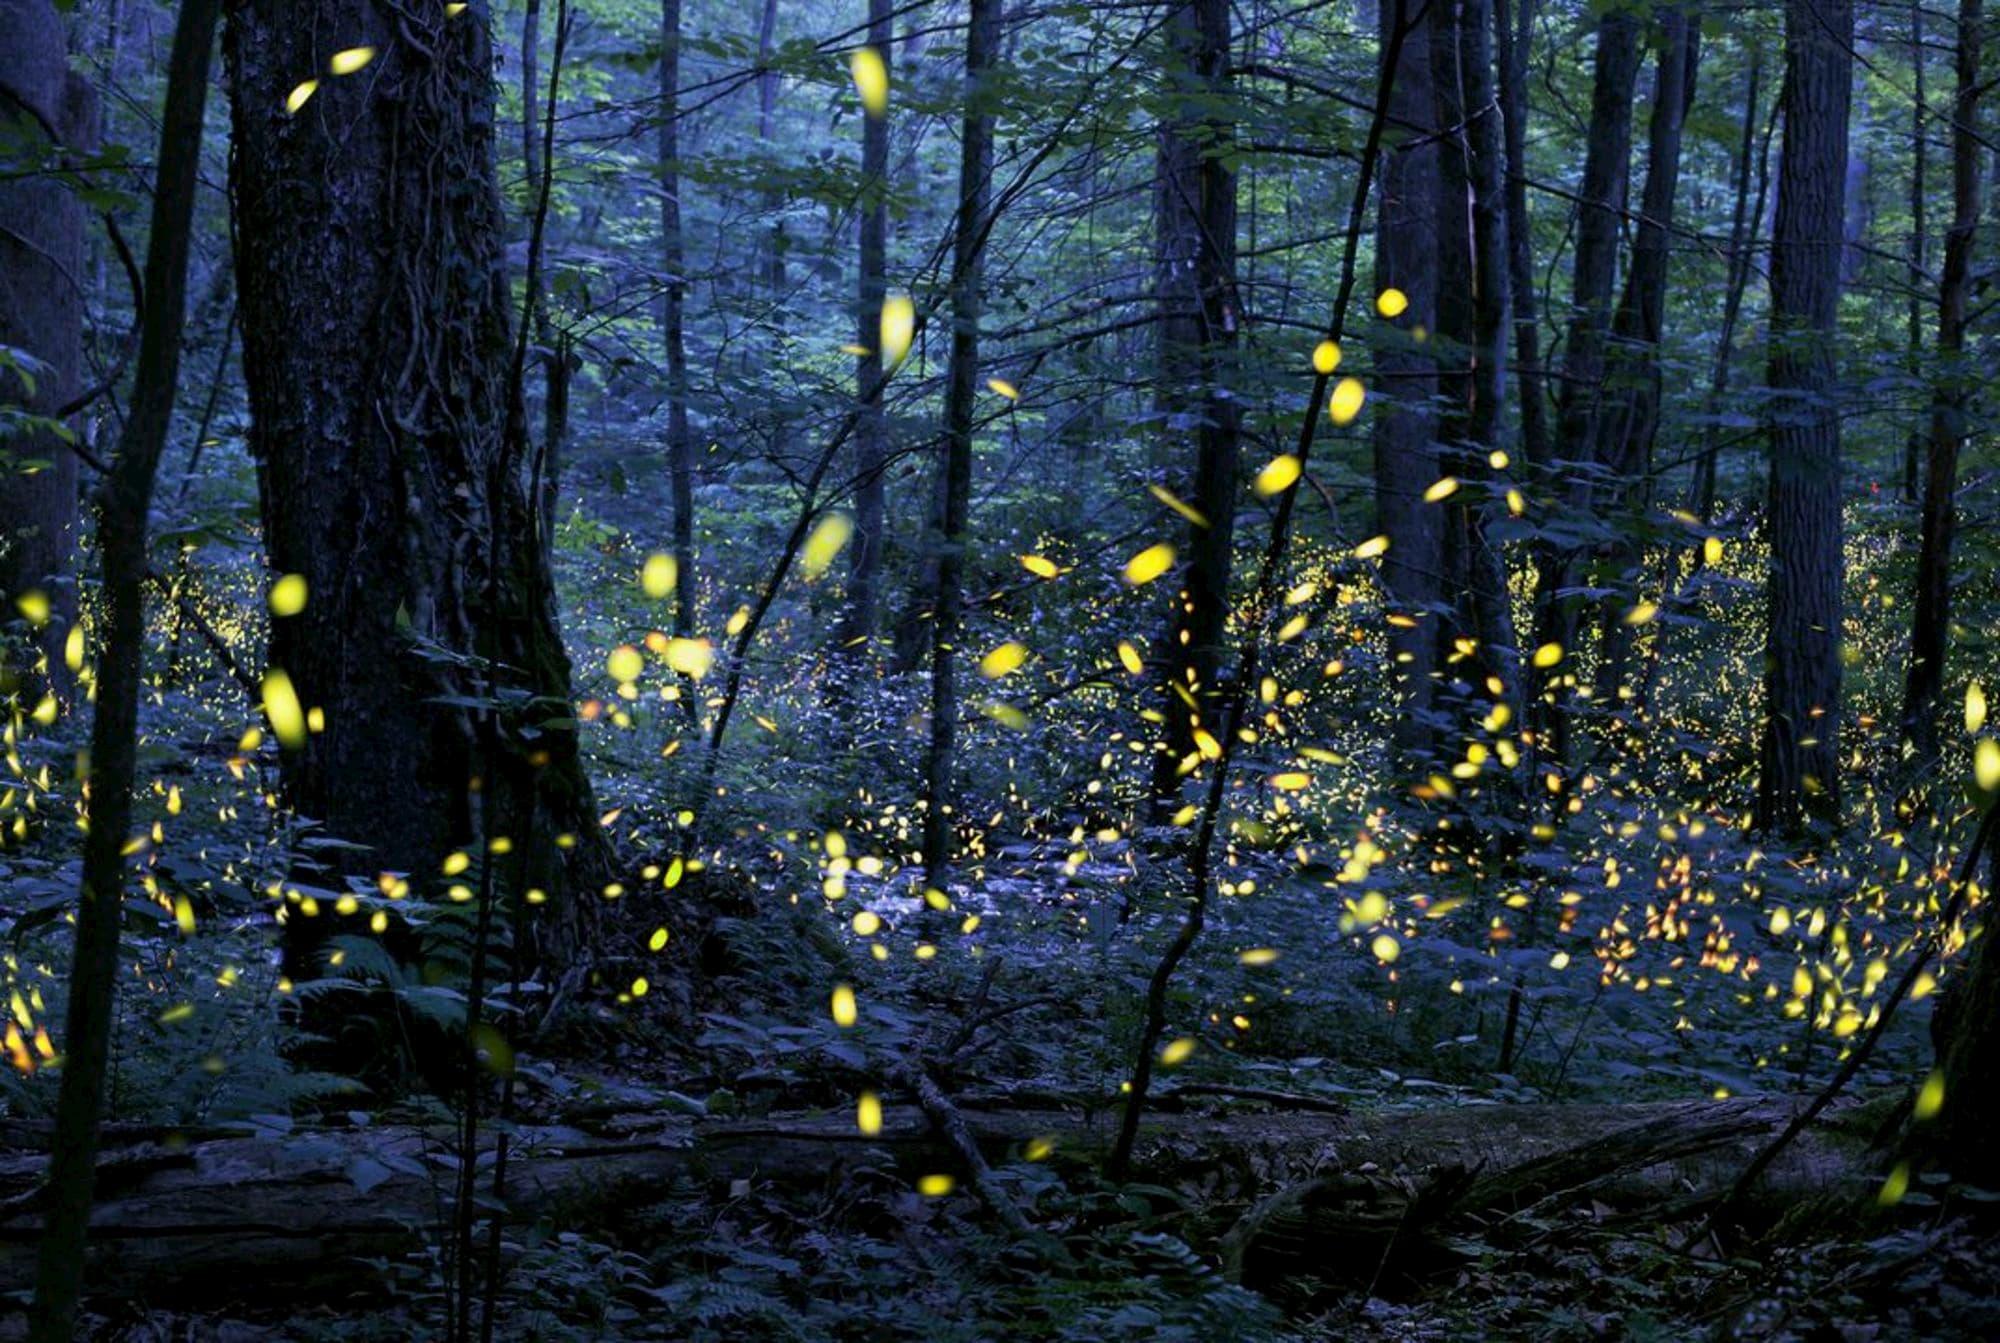 Synchronous Fireflies in the Great Smoky Mountains National Park